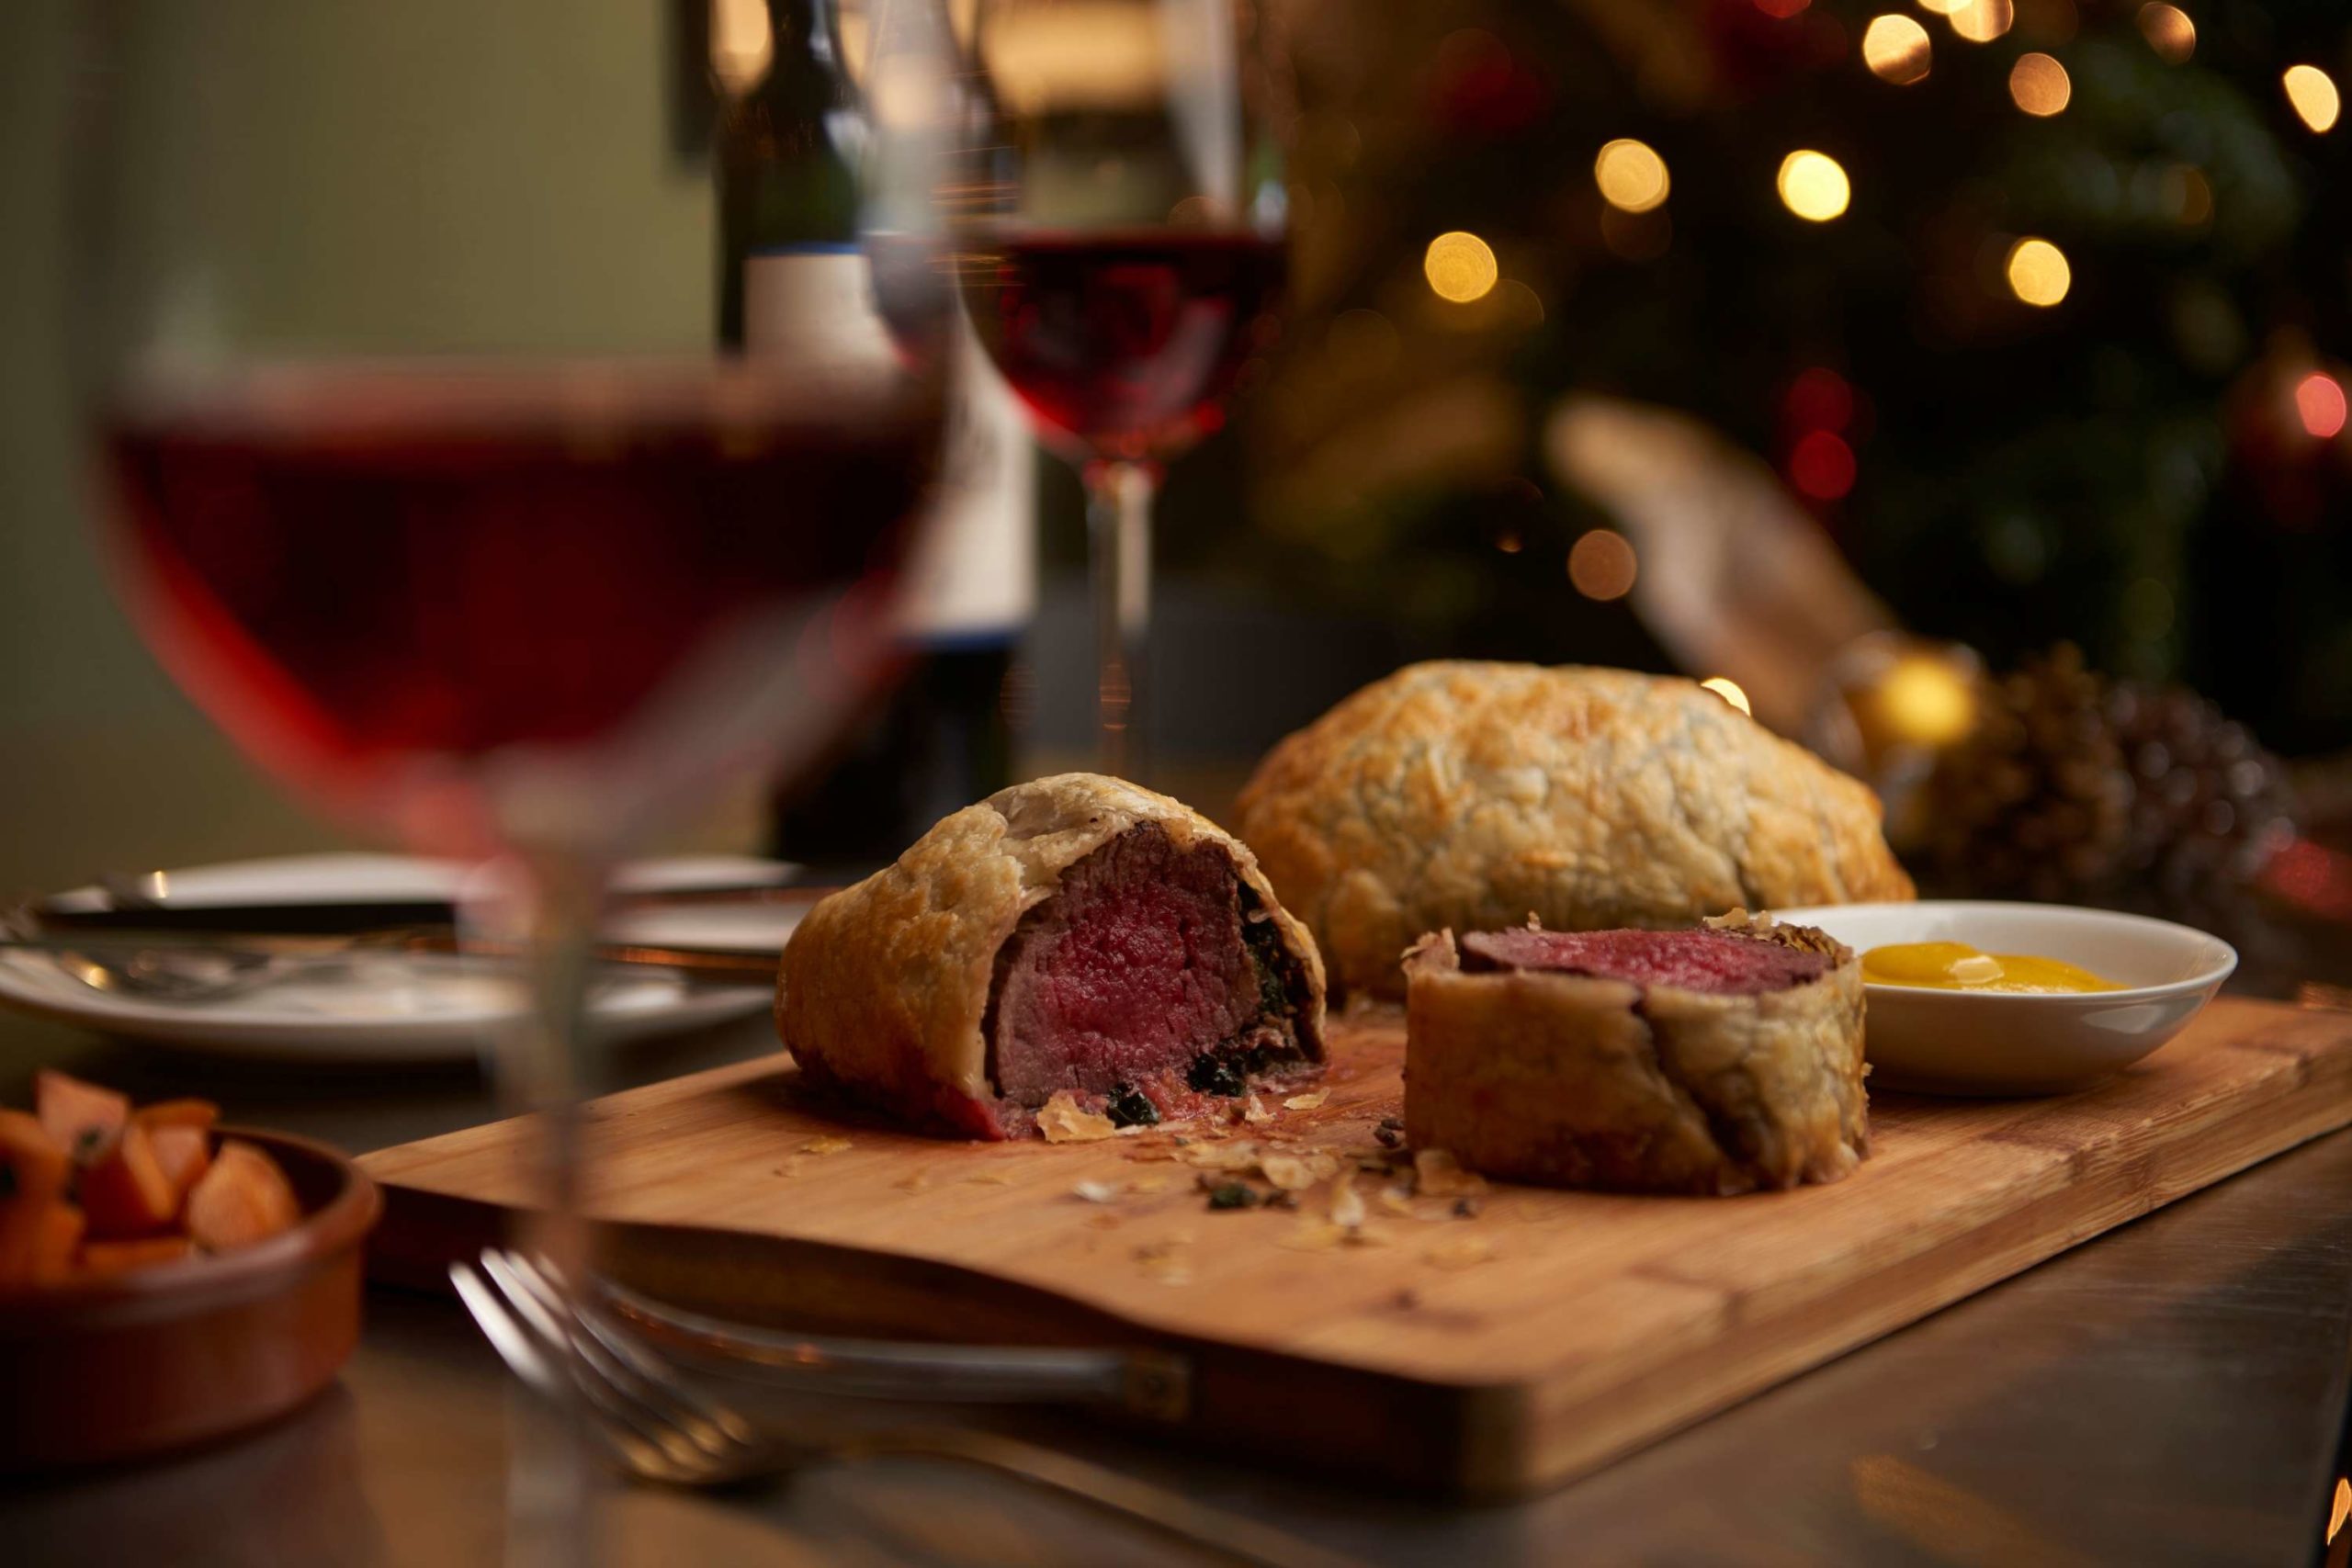 Beef Wellington is a rich, flavourful dish that is perfect as a Christmas recipe